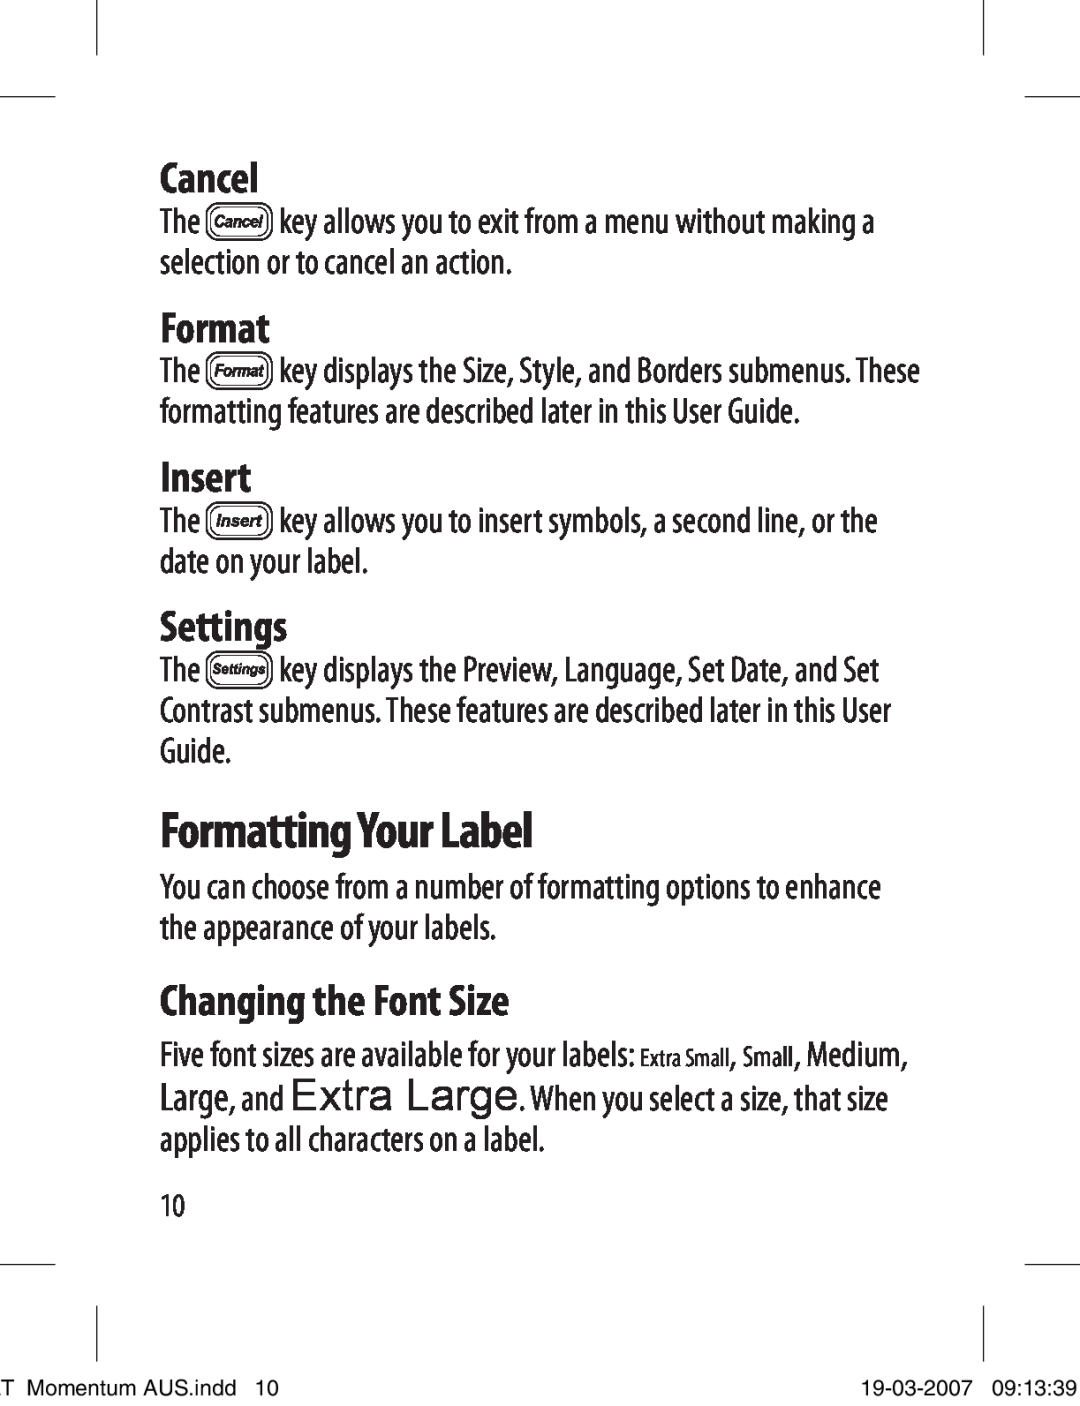 Dymo LT-100T manual Formatting Your Label, Cancel, Insert, Settings, Changing the Font Size 